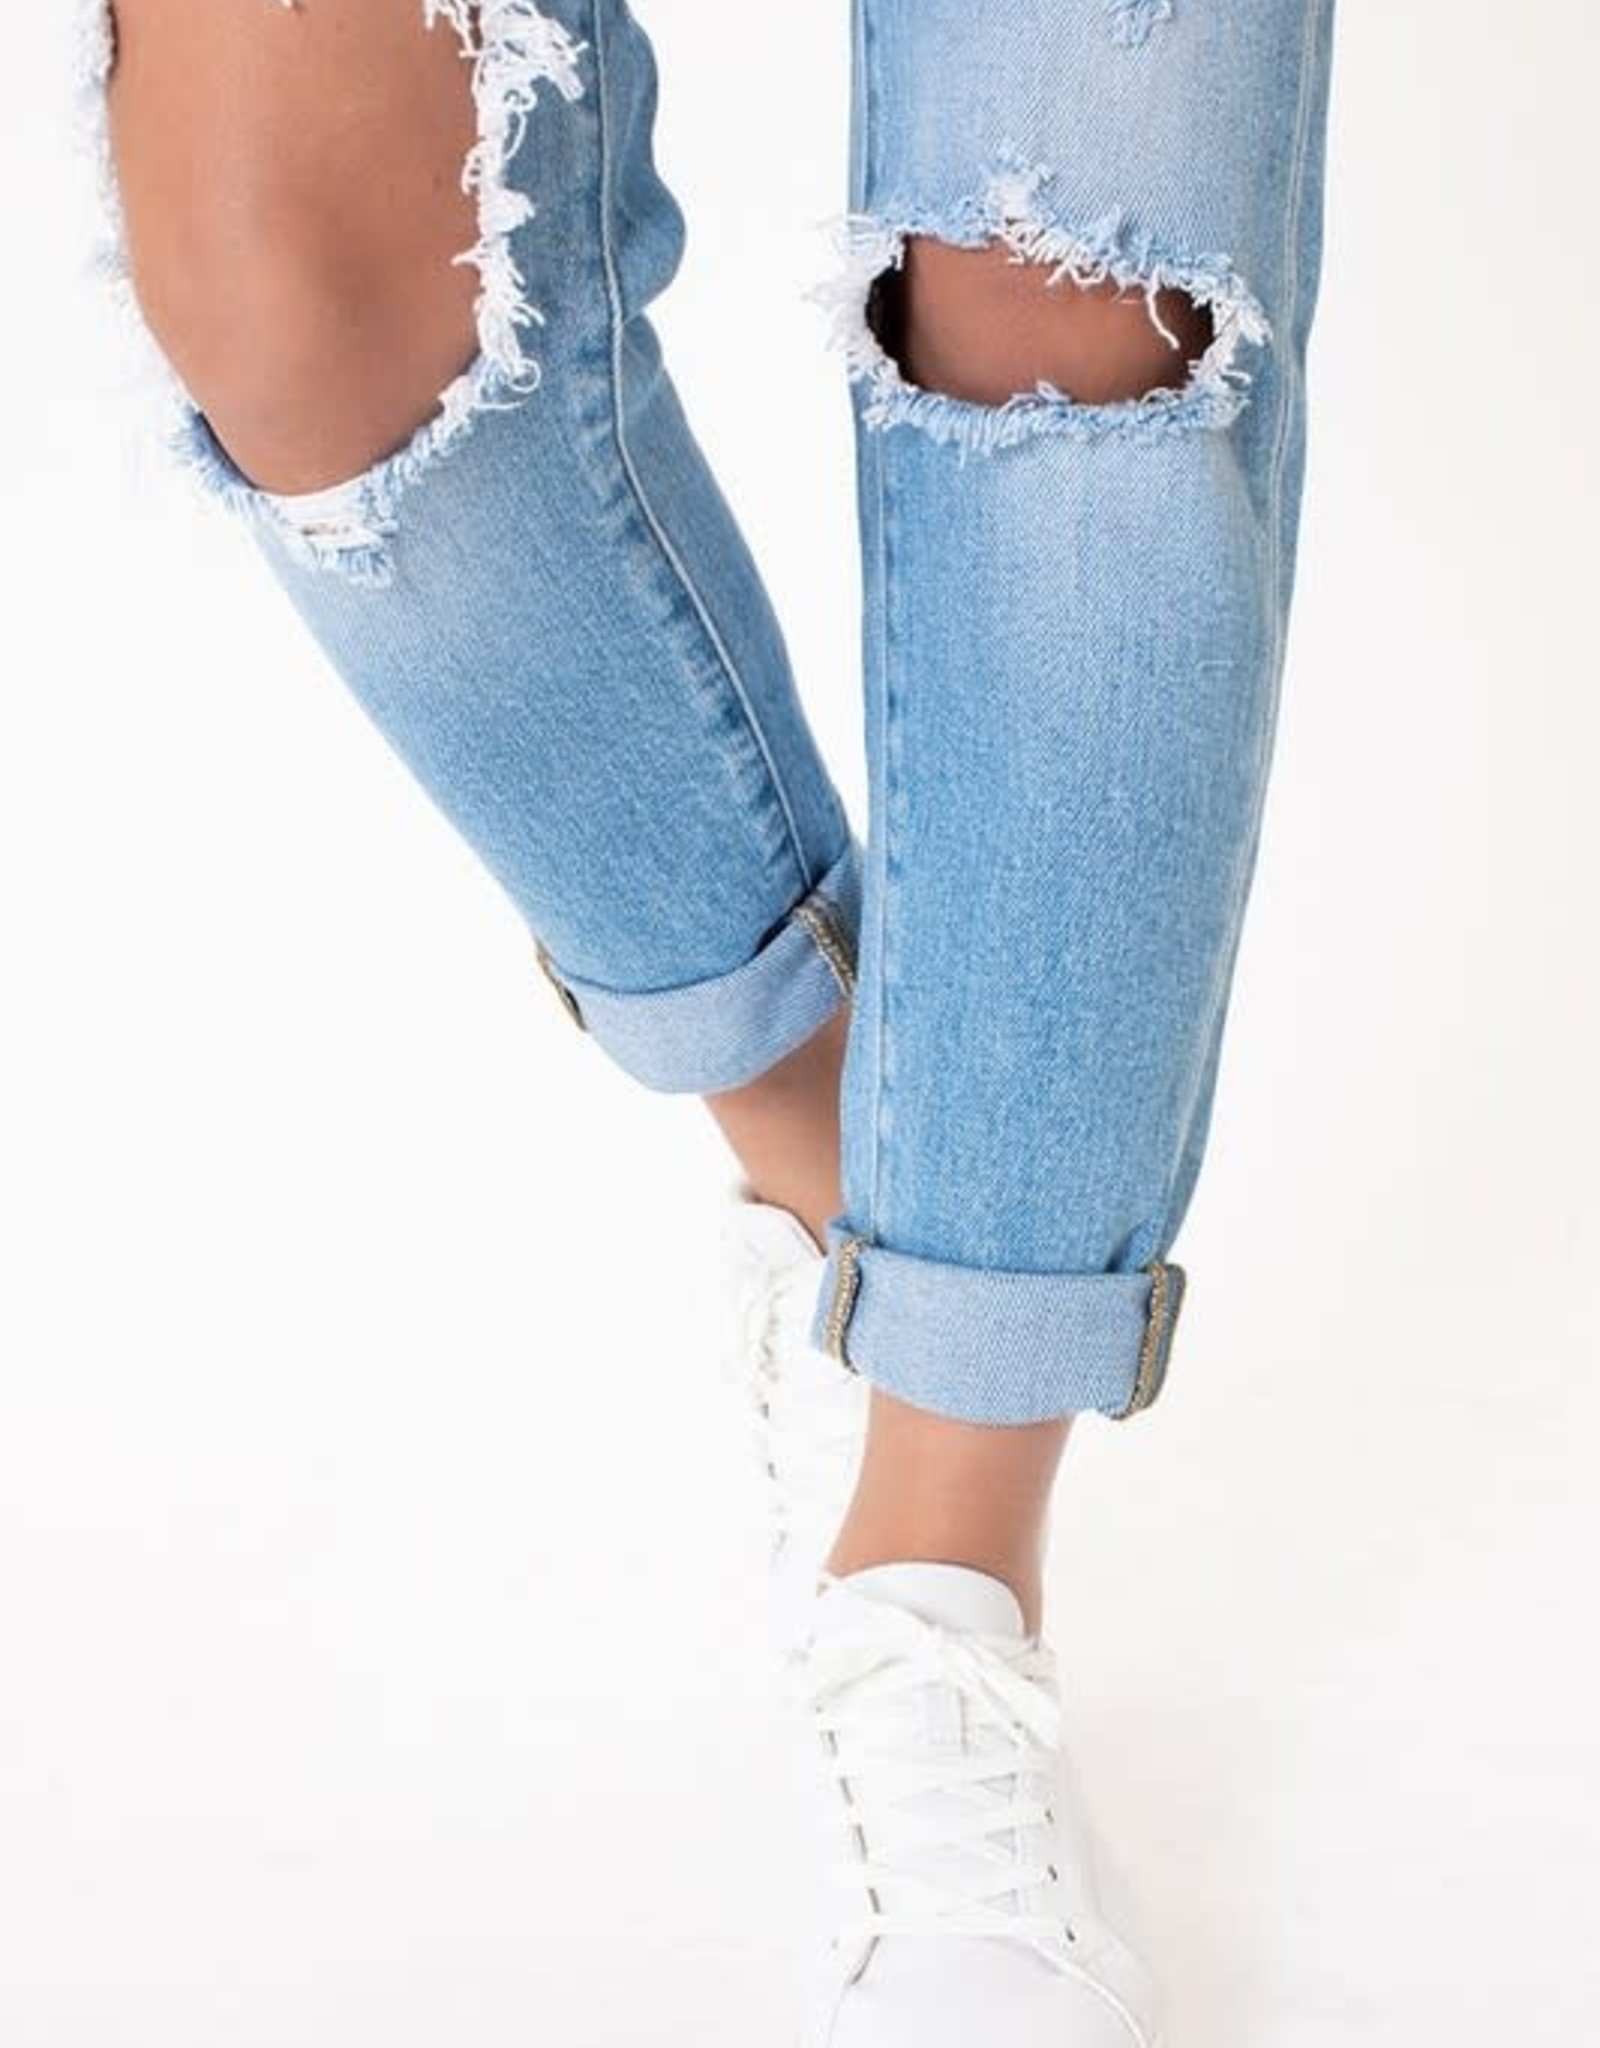 Kan Can USA High Rise Distressed Mom Jeans - KC9226M